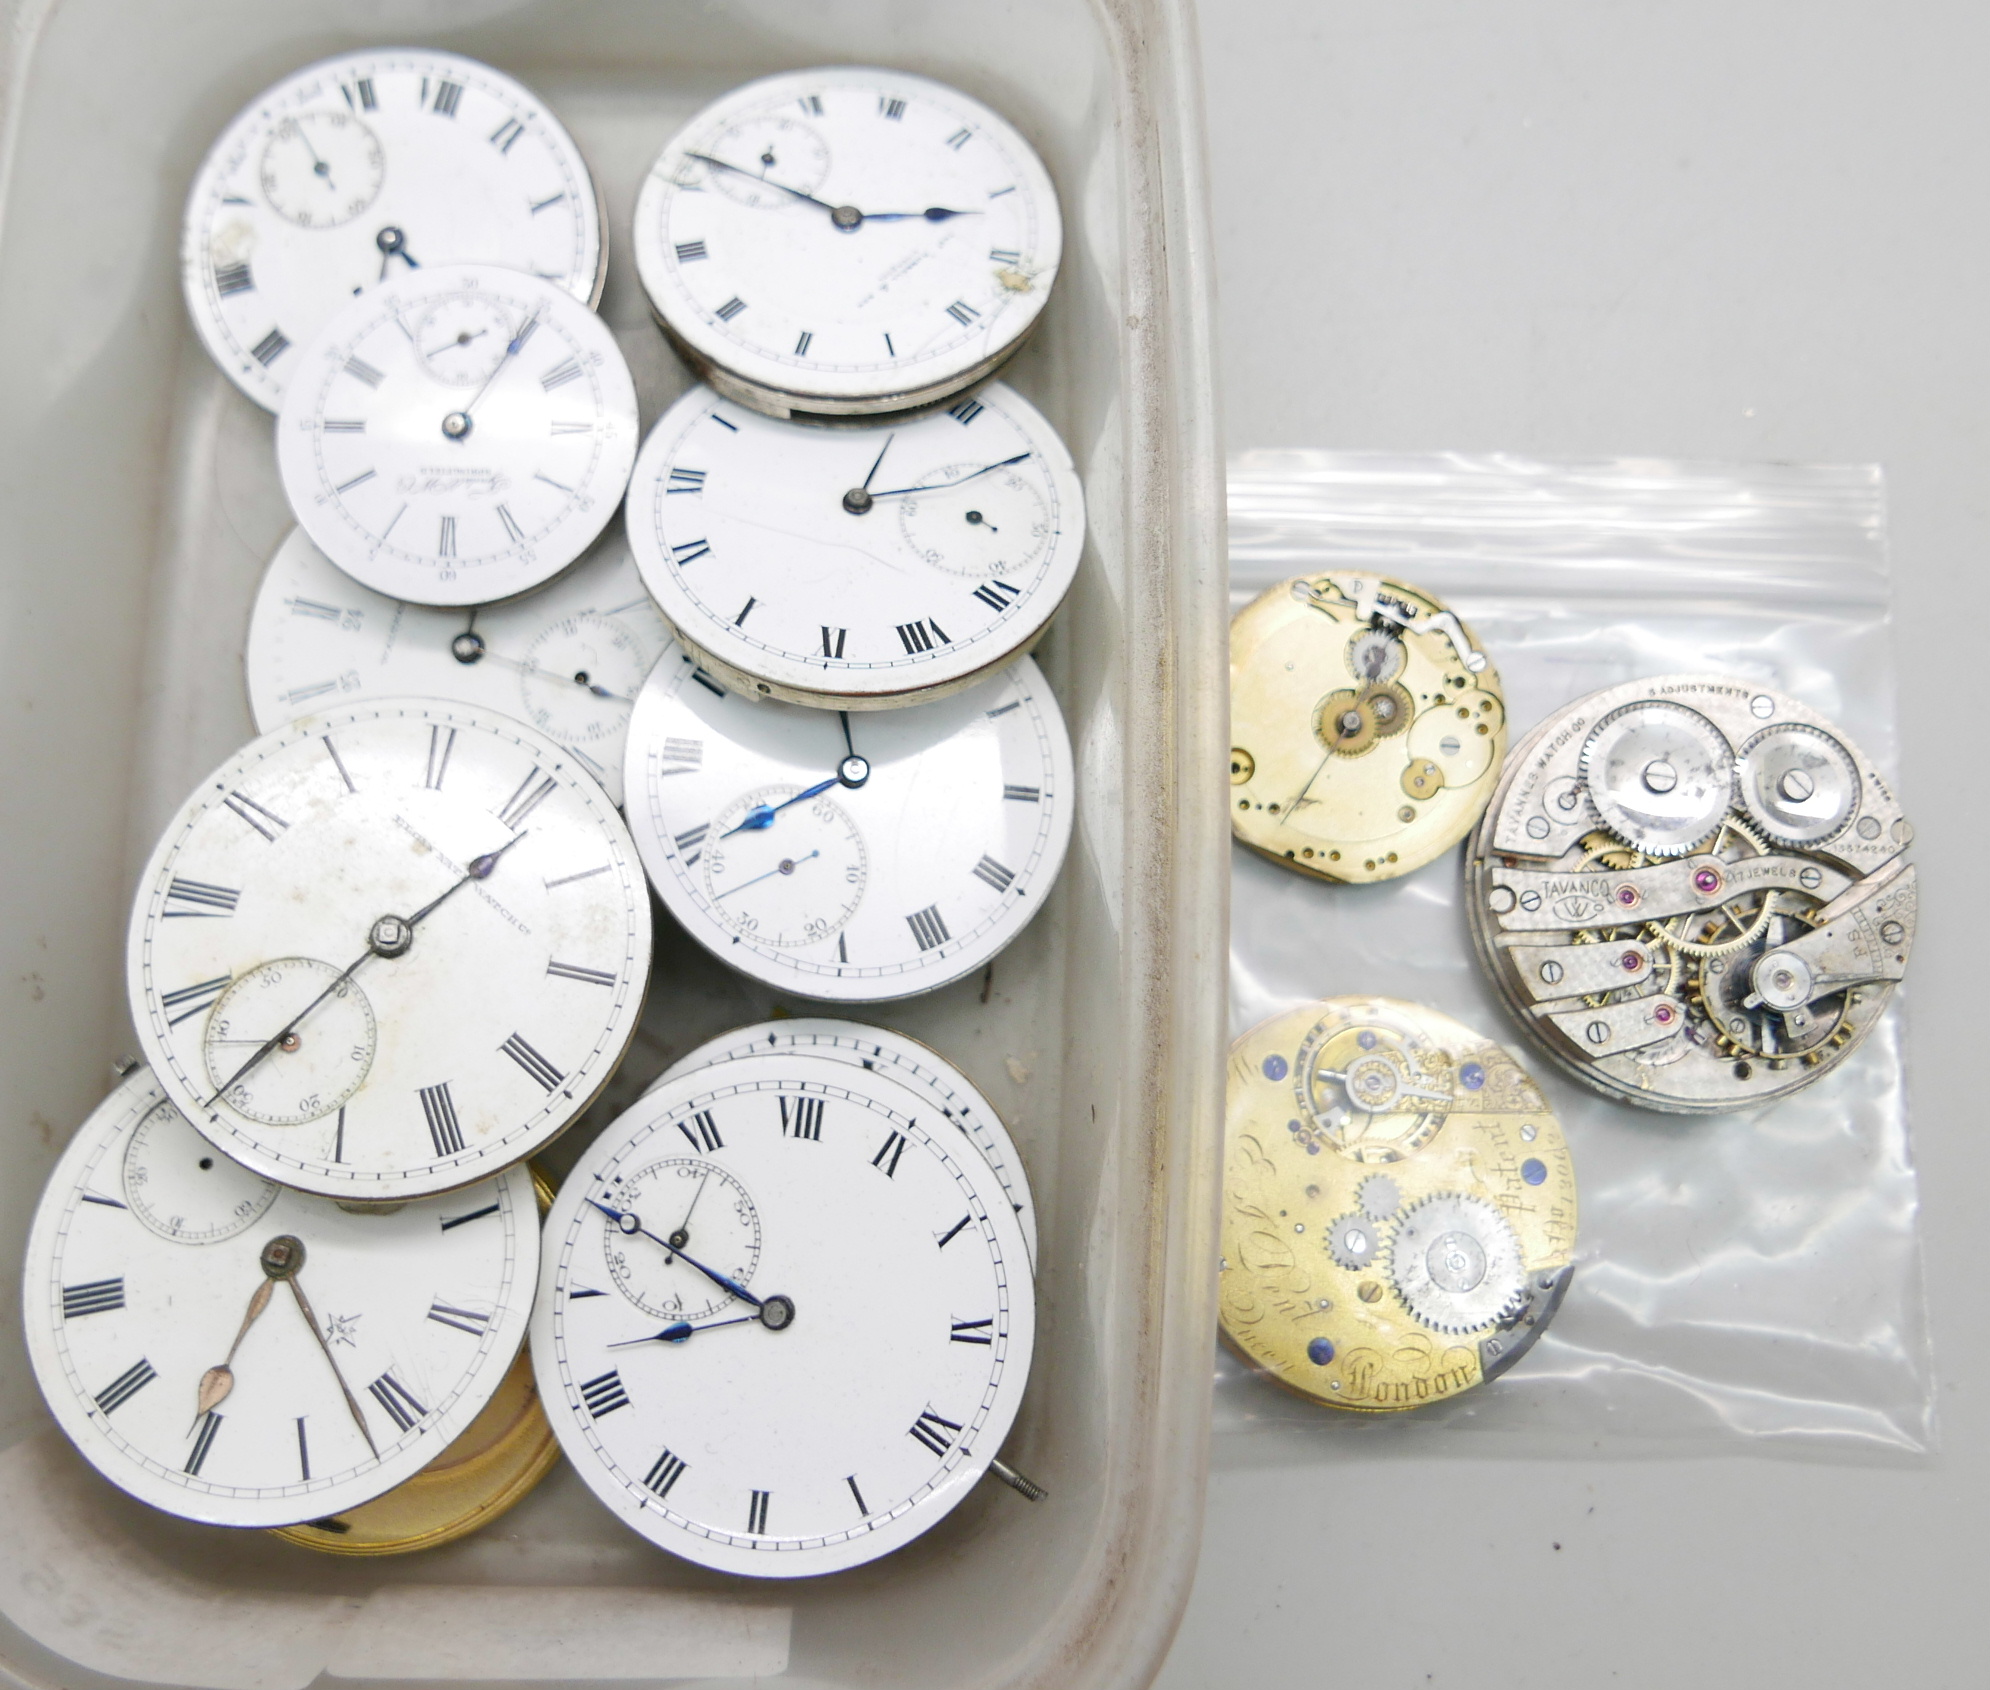 Pocket watch movements including E.J. Dent (missing dial)